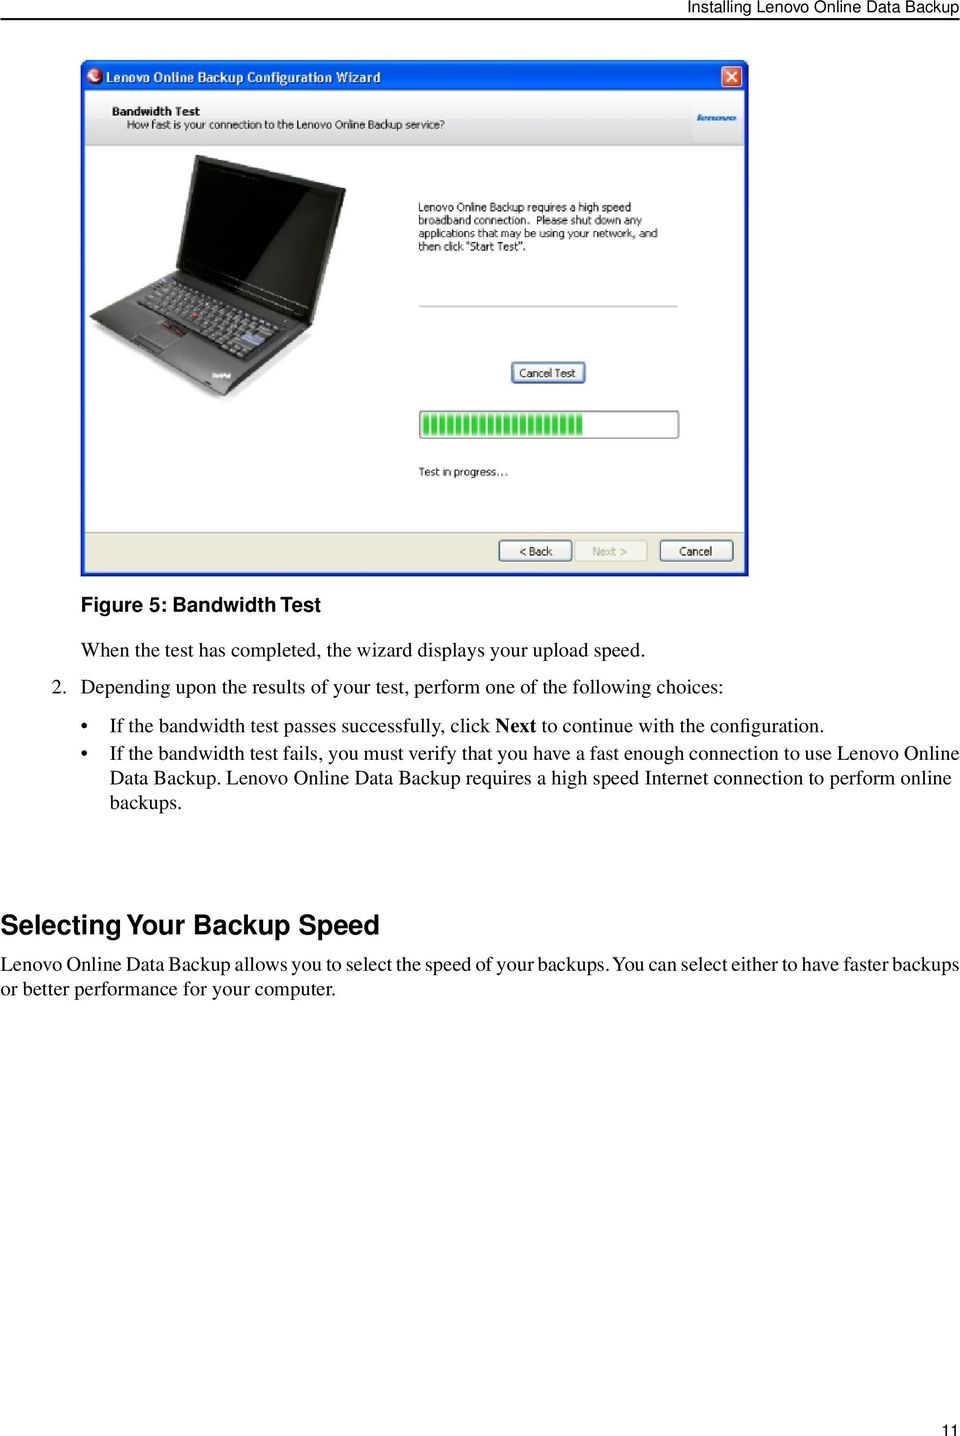 If the bandwidth test fails, you must verify that you have a fast enough connection to use Lenovo Online Data Backup.